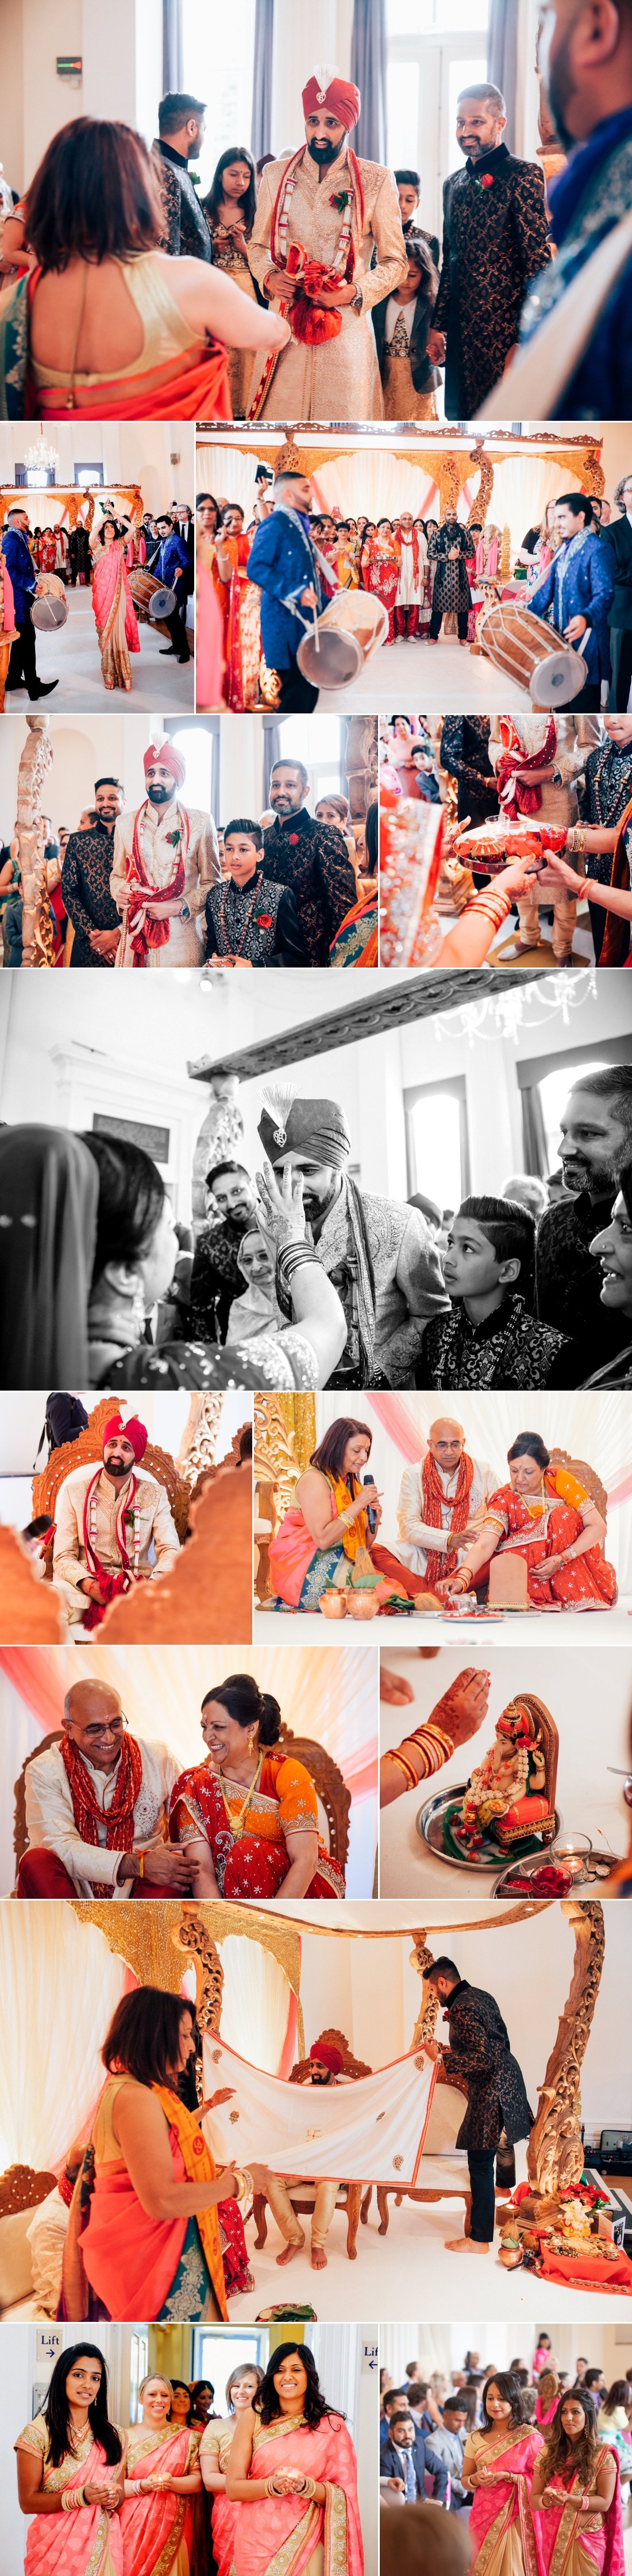 Pittville Pumps Indian Wedding Photography - Image 4